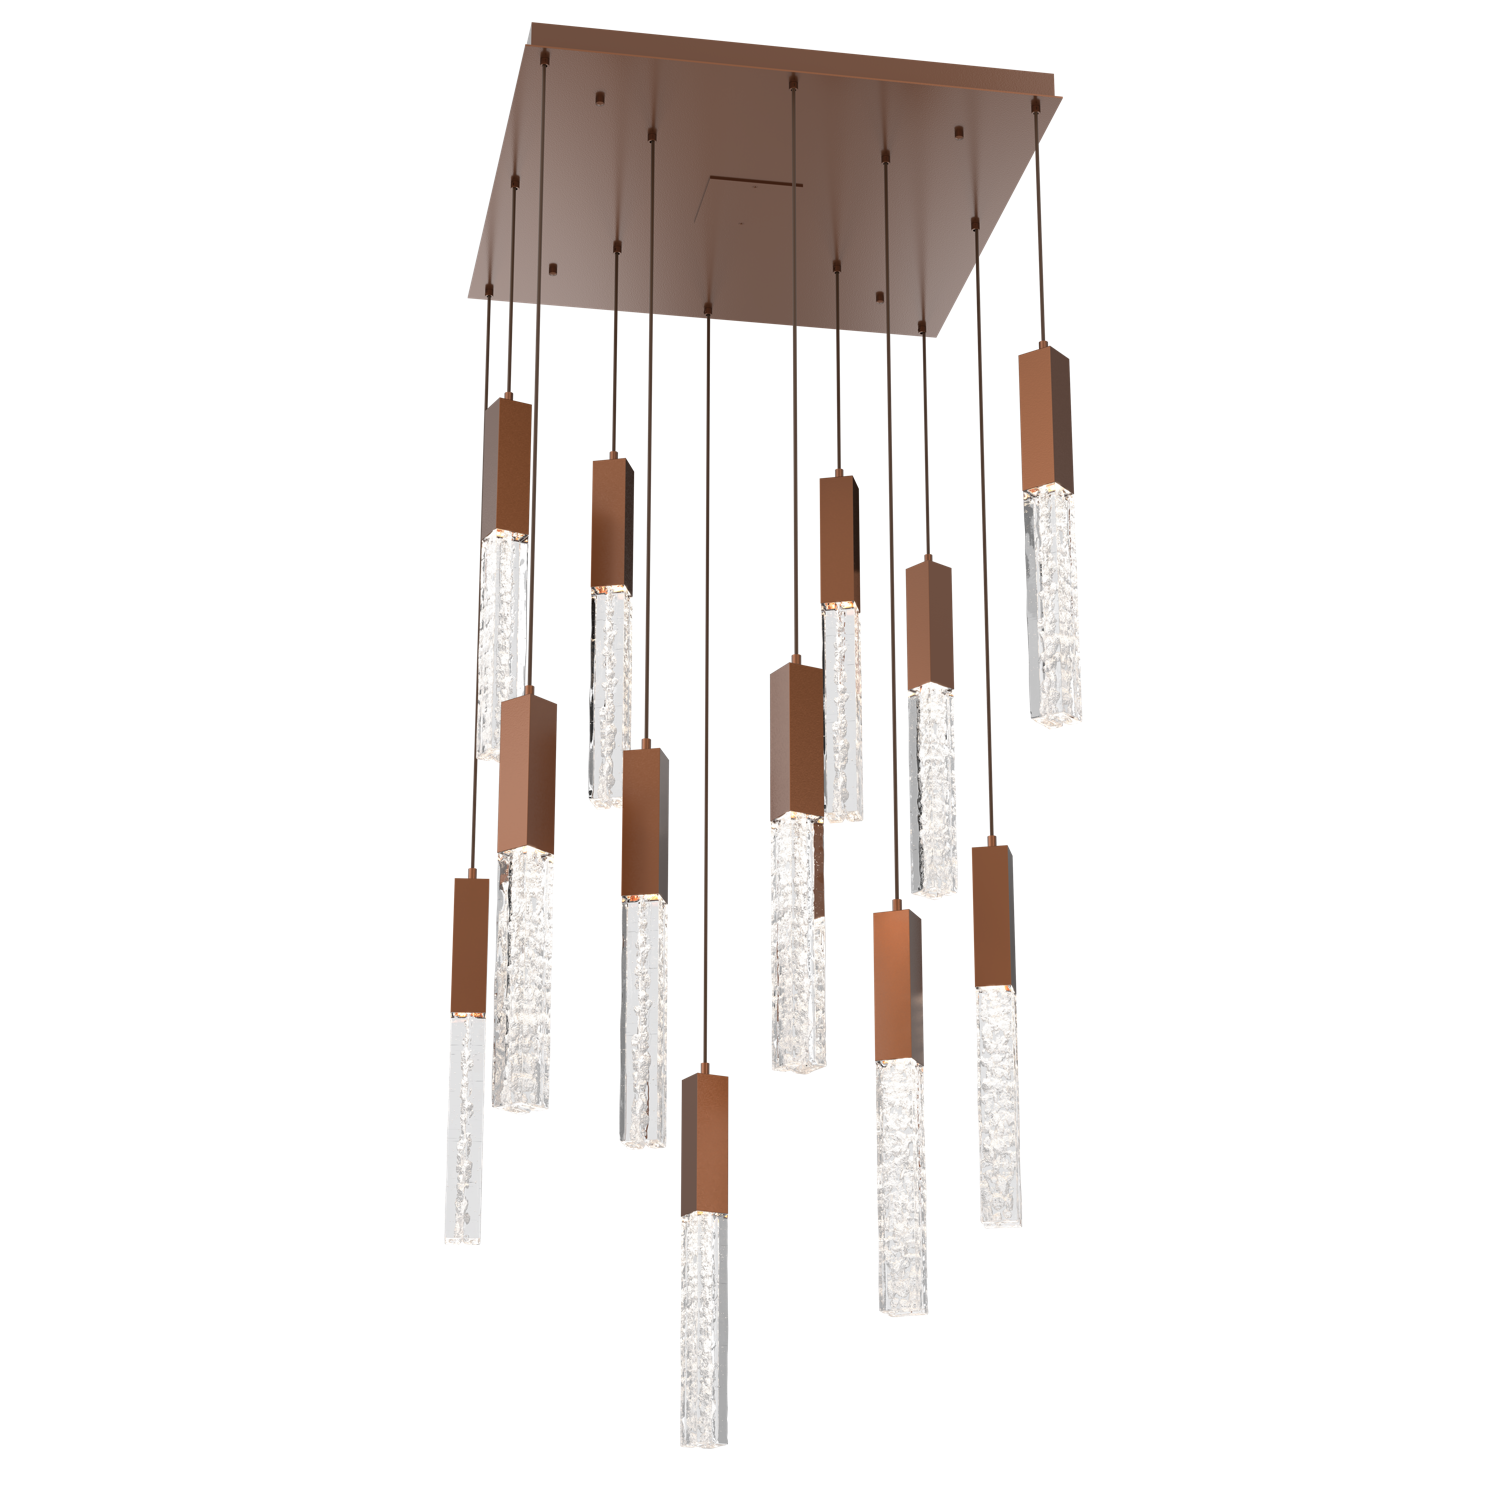 CHB0060-12-BB-GC-Hammerton-Studio-Axis-12-Light-Pendant-Chandelier-with-Burnished-Bronze-finish-and-clear-cast-glass-and-LED-lamping